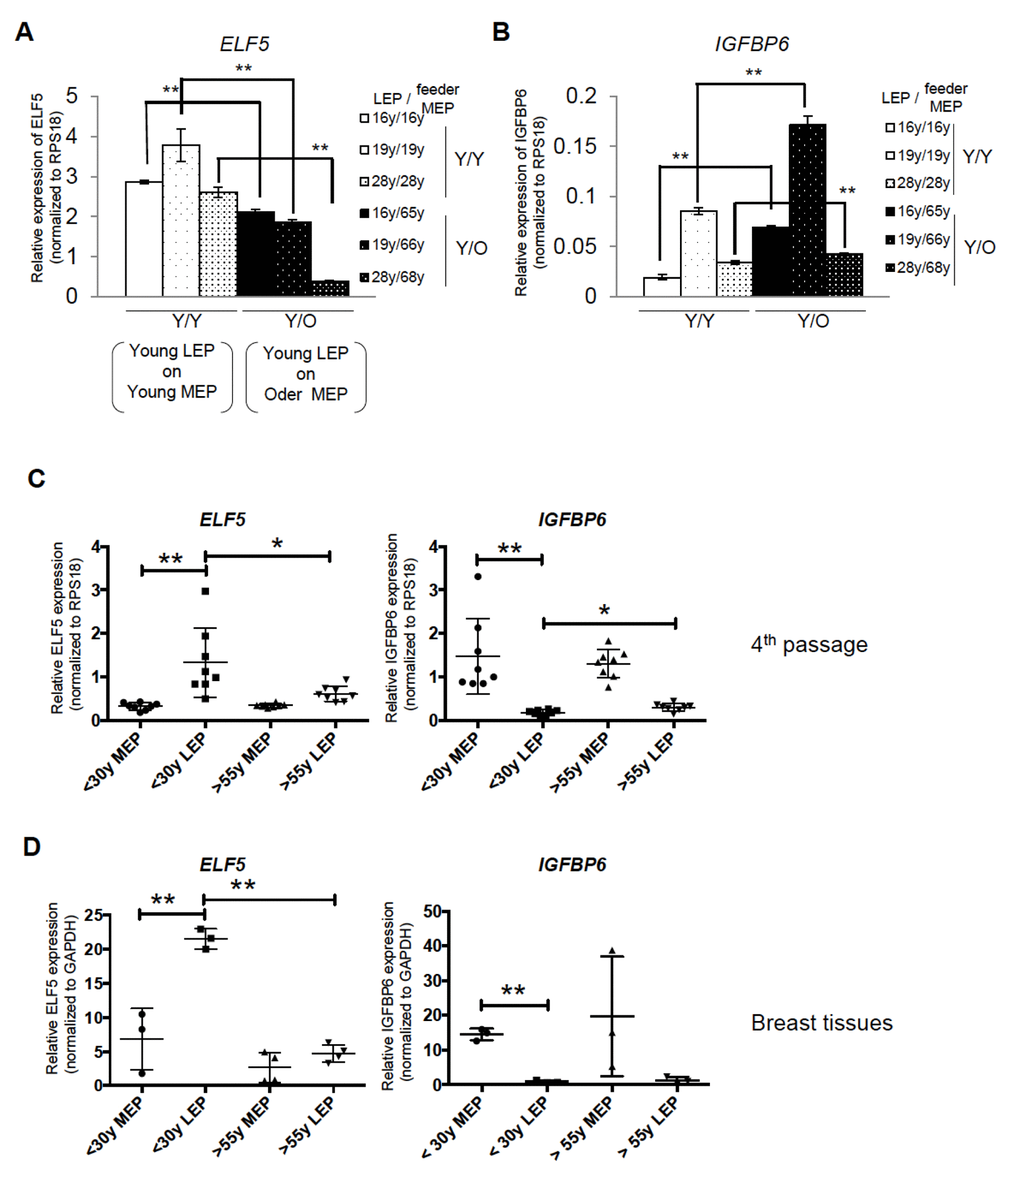 In vivo and primary cell age-dependent ELF5 and IGFBP6 expression were recapitulated from in mixed age co-culture. Mixed combinations of MEP and LEP from different aged donors demonstrates that age is the important determinant of ELF5 and IGFBP6 expression. Bar graphs showing (A) ELF5 and (B) IGFBP6 gene expression after 10 days in co- culture with different combinations of young LEP and young or old feeder MEPs. Gene expression was normalized to RPS18. (C and D) Age-dependent expression levels of the two genes in co-culture recapitulate 4p and primary HMEC. Lineage-and age-dependent ELF5 or IGFBP6 gene expression was shown by dot plots in (C) 4p HMEC and in (D) breast tissues. * and ** showed statistical significances at p